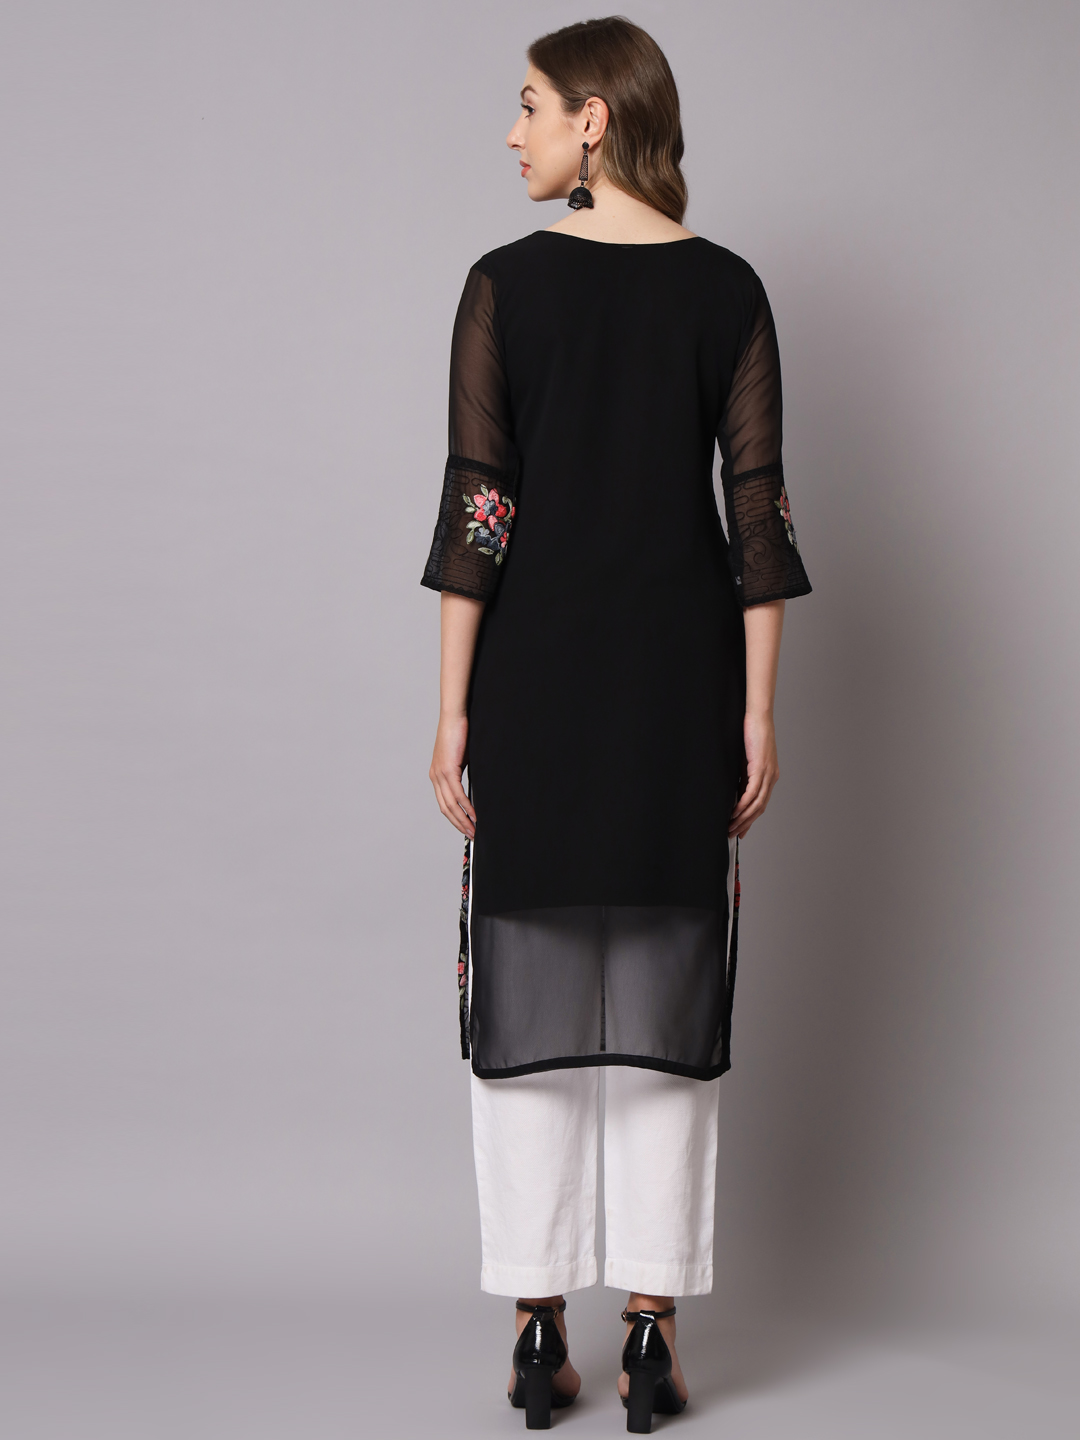 Details more than 78 black netted kurti latest